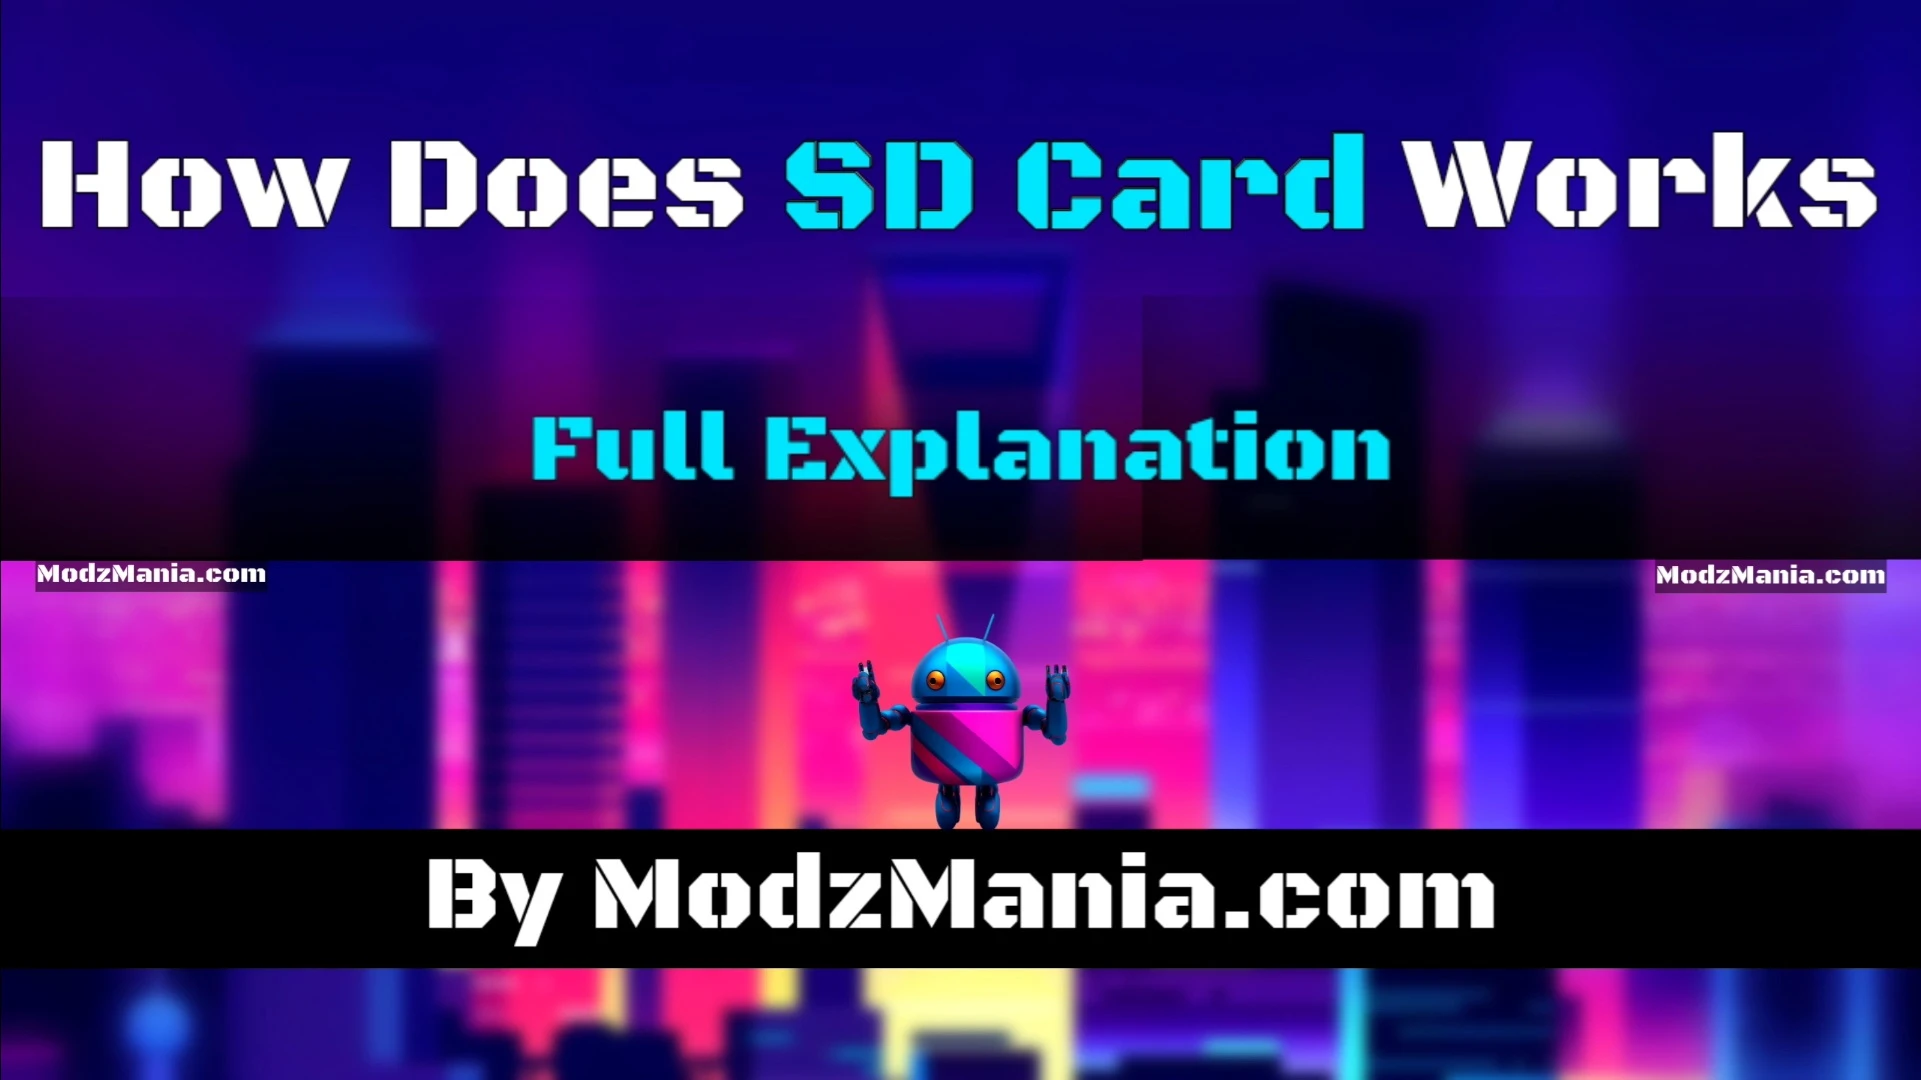 How Does SD Card Works? Full Explanation